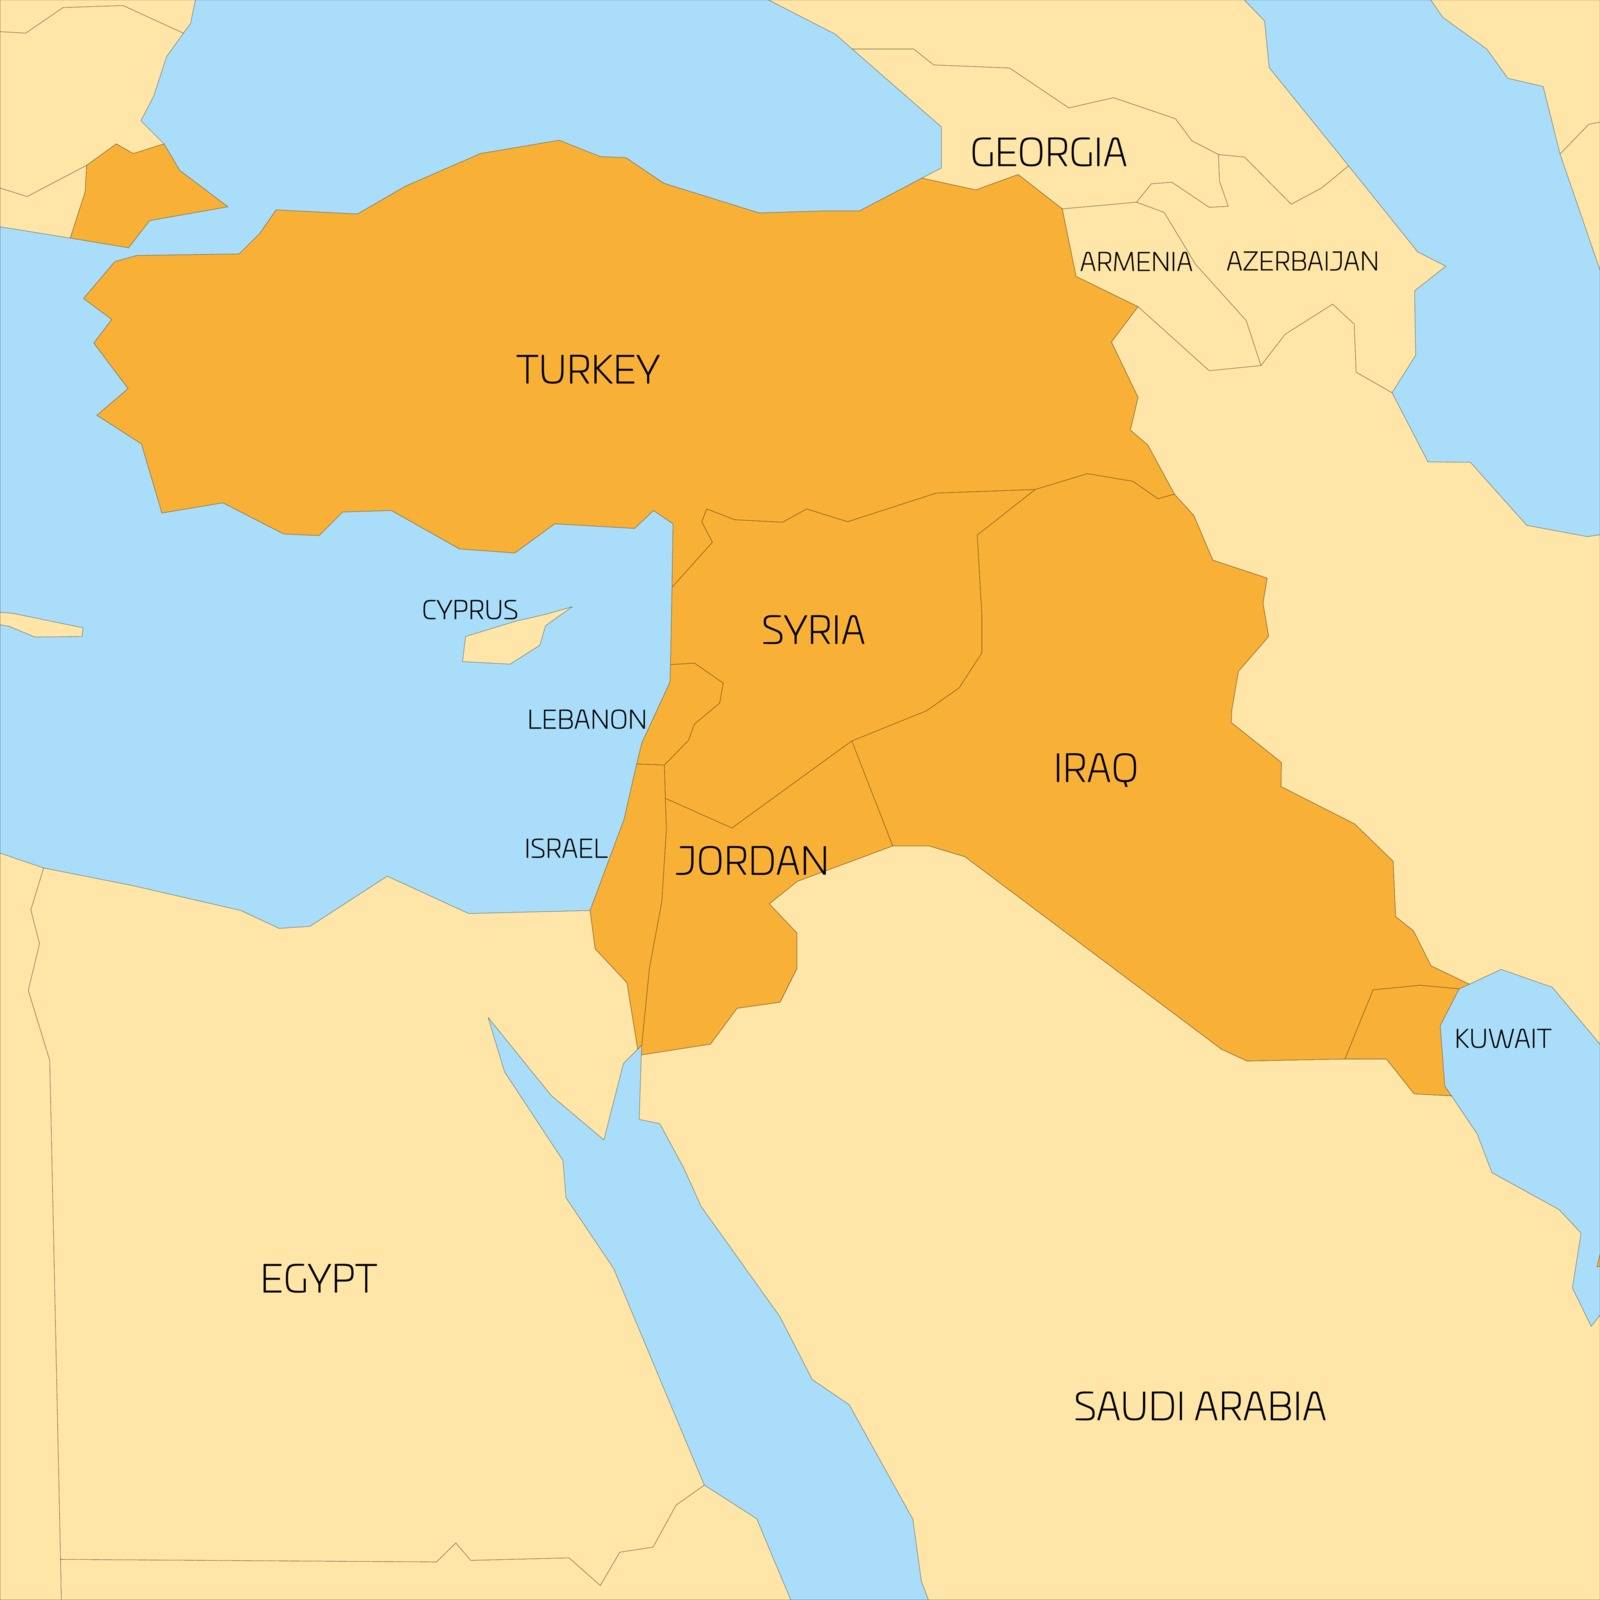 Map of Middle East or Near East transcontinental region with orange highlighted Turkey, Syria, Iraq, Jordan, Lebanon and Israel. Flat map with yellow land, thin black borders and blue sea.